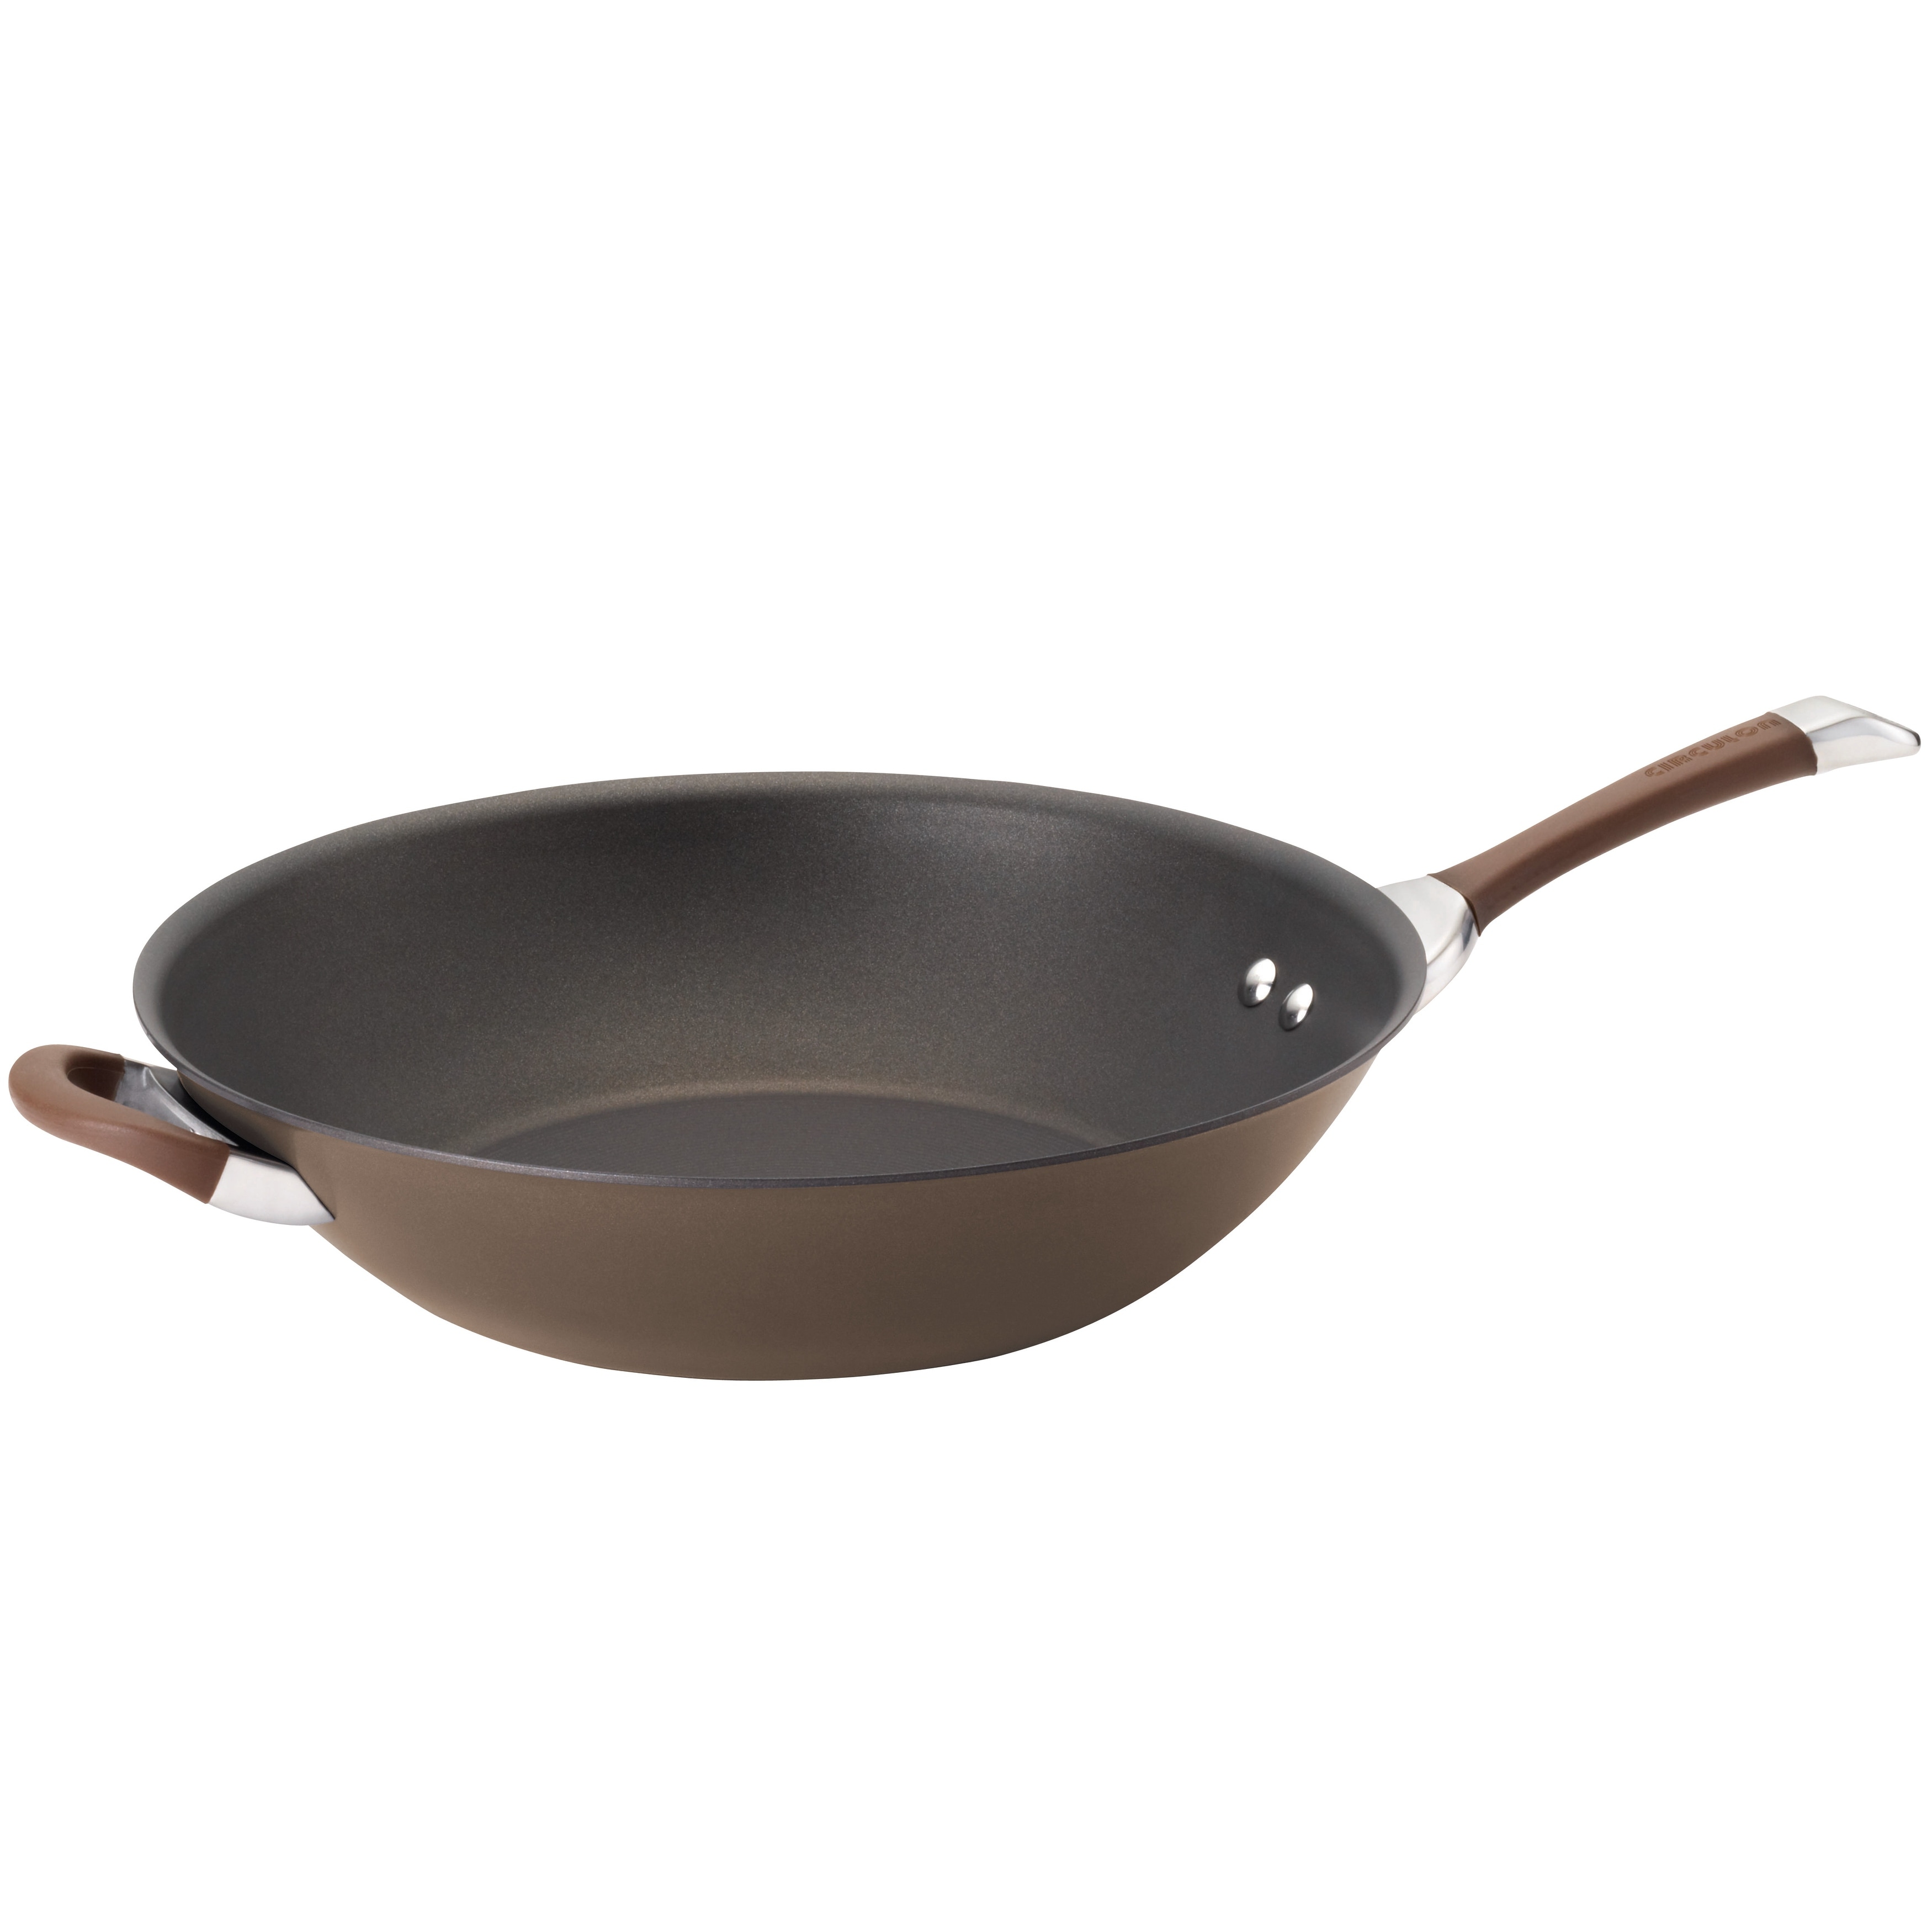 https://ak1.ostkcdn.com/images/products/is/images/direct/2475889edd68c4ed13cf826570be2cff72c882b7/Circulon-Symmetry-Hard-Anodized-Nonstick-Induction-Stir-Fry-Pan-with-Helper-Handle%2C-14-Inch%2C-Chocolate.jpg